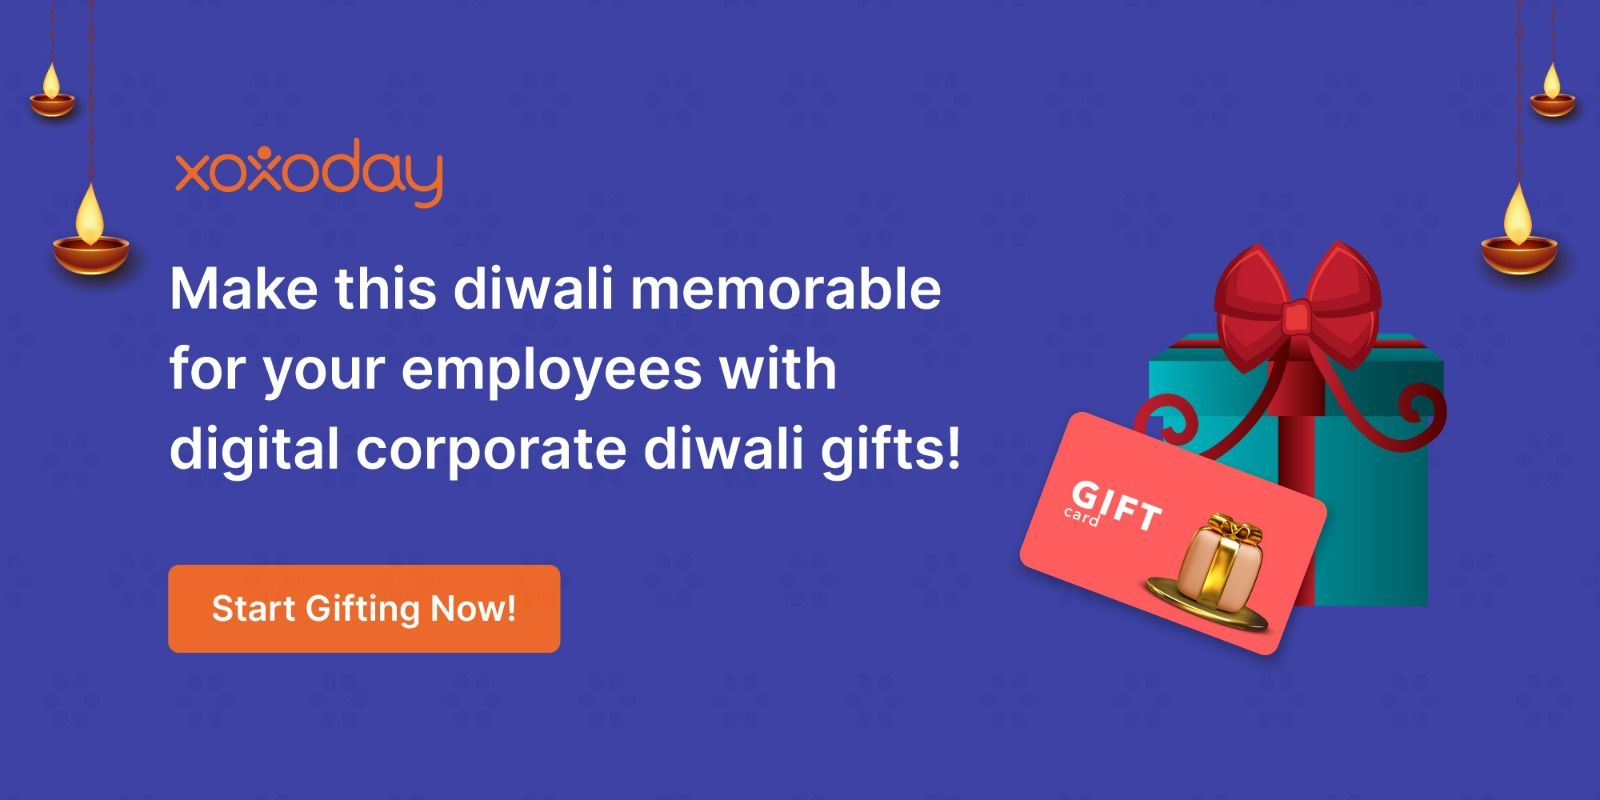 Five Amazing Corporate Diwali Gifts Ideas to Strengthen Relation with  Employees & Clients | CakeFlowersGift.com Blog